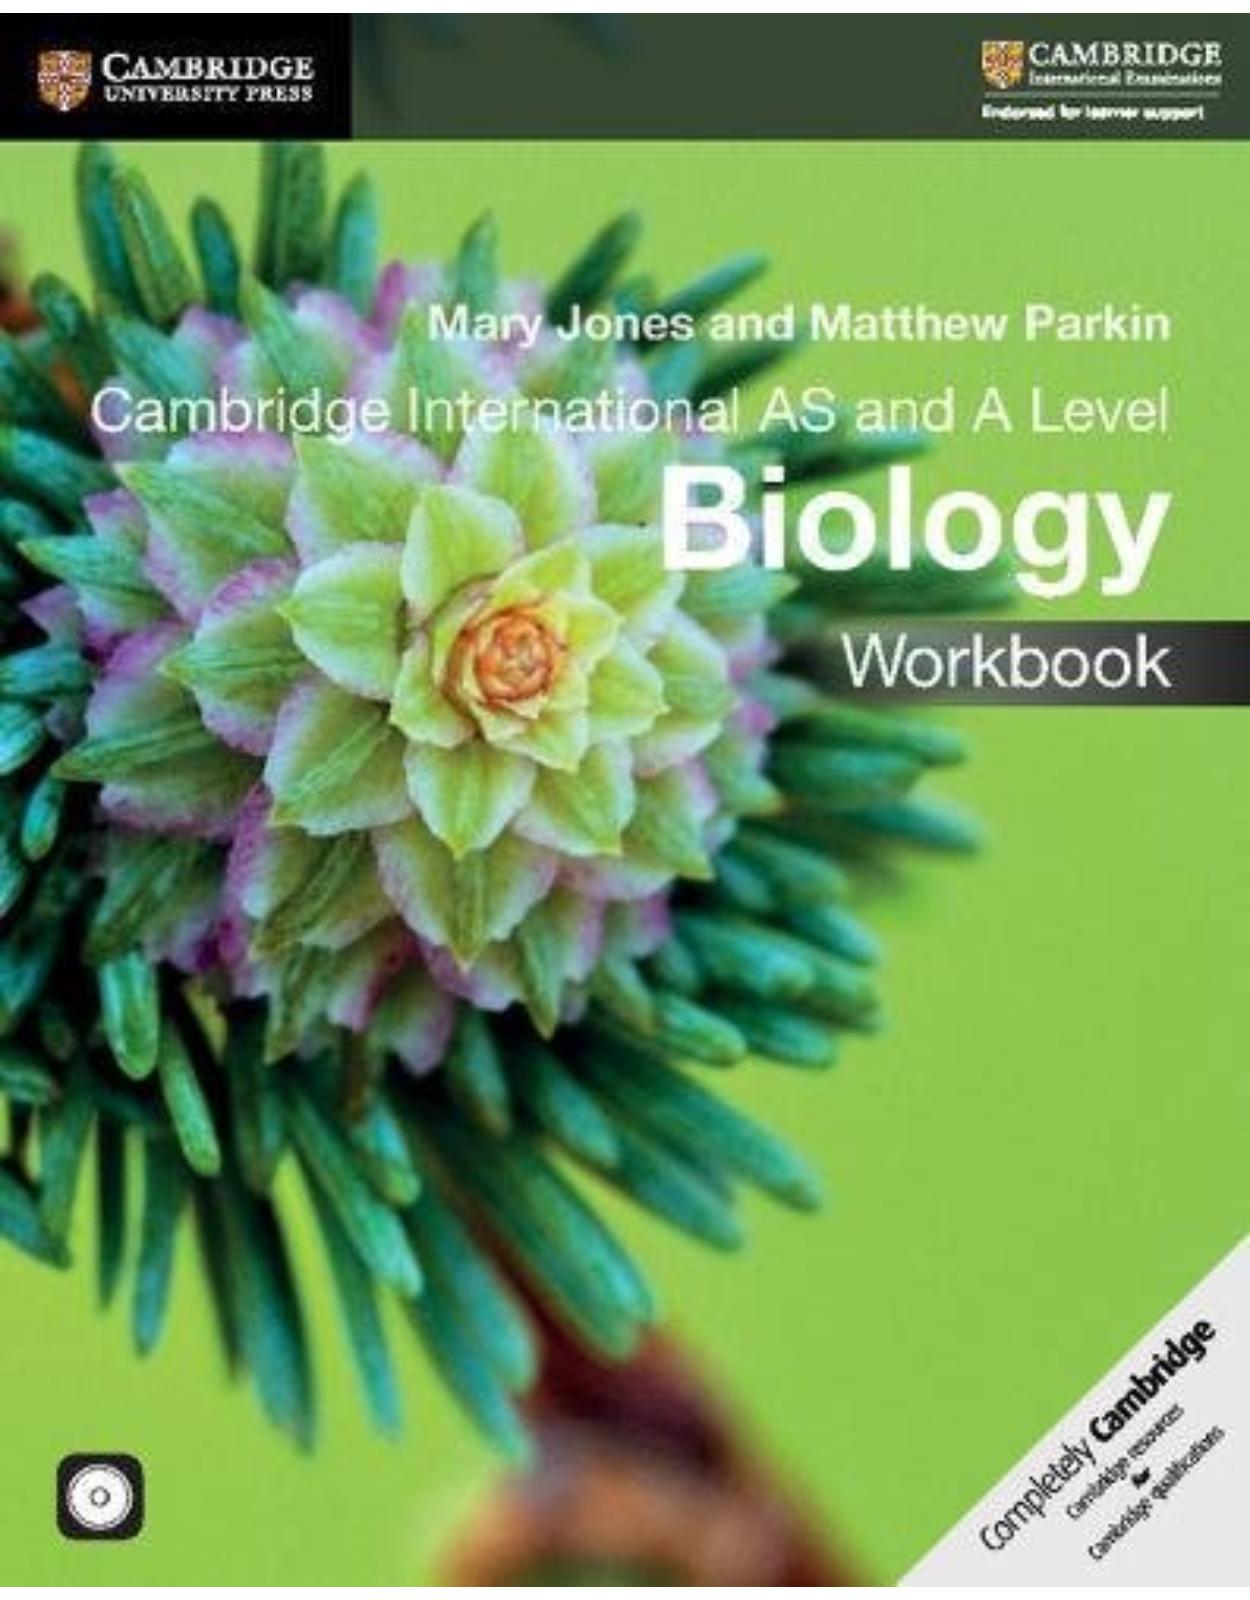 Cambridge International AS and A Level Biology Workbook with CD-ROM (Cambridge International Examinations) 